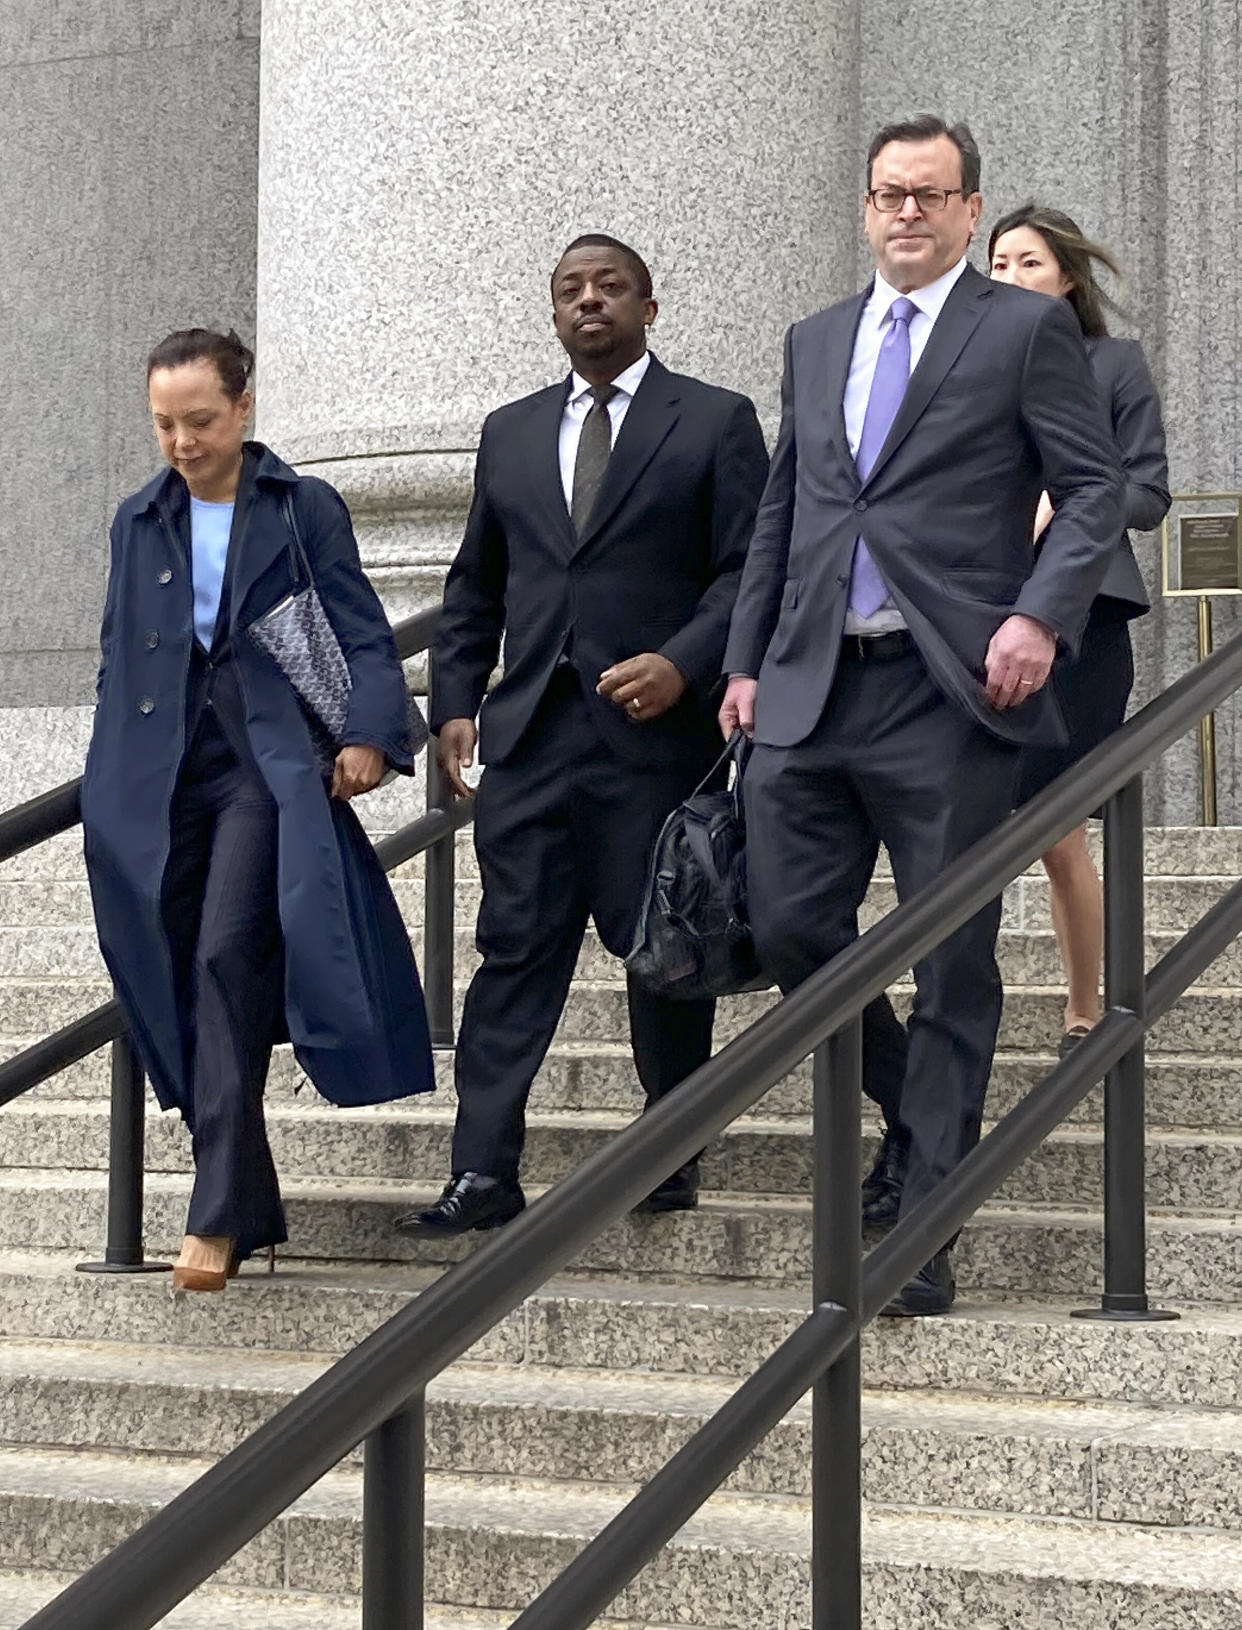 Former New York Lt. Gov. Brian Benjamin, center, leaves federal court, Thursday, May 12, 2022, in New York. A January trial date has been set for former New York Lt. Gov. Brian Benjamin to face charges that he traded his clout as a state senator for campaign contributions. (AP Photo/Larry Neumeister)